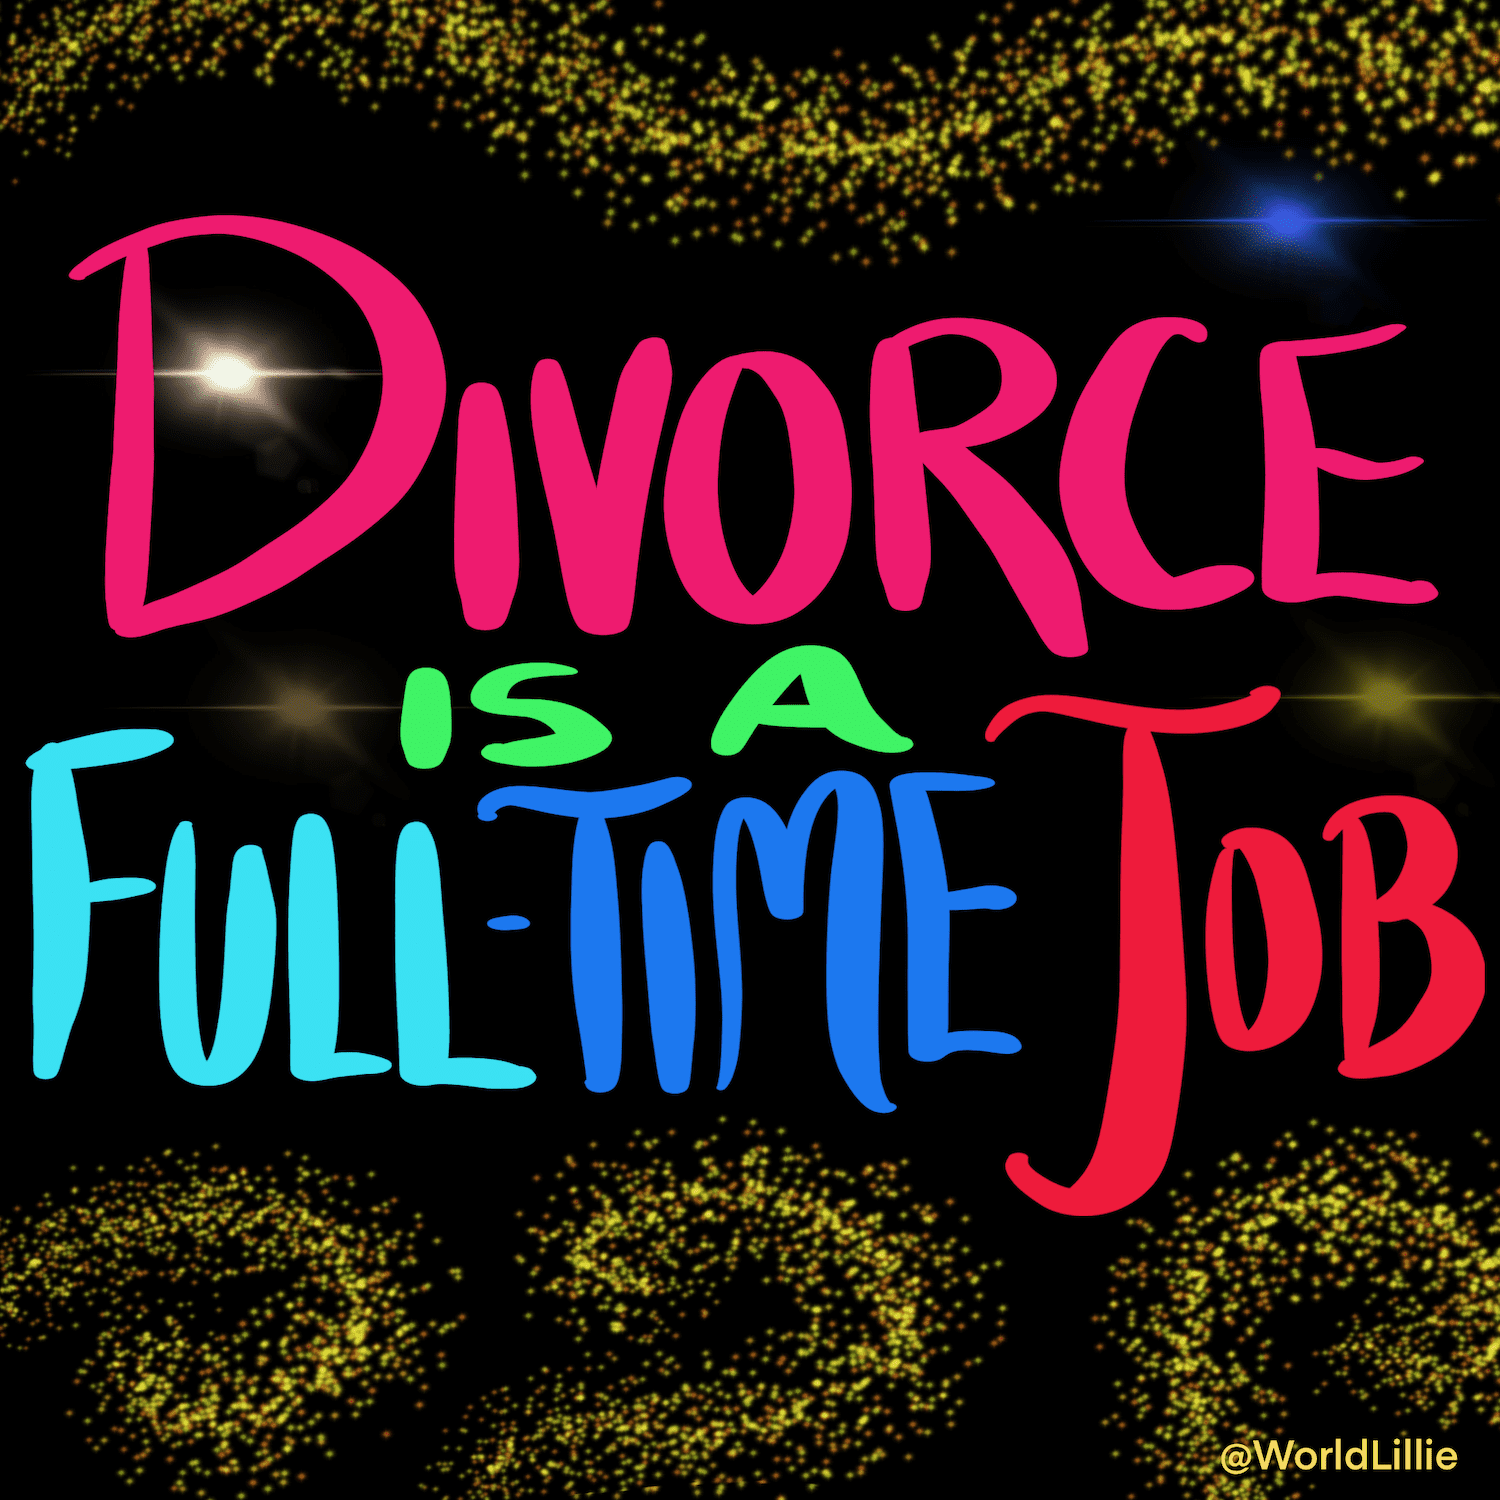 Divorce is a full time job!